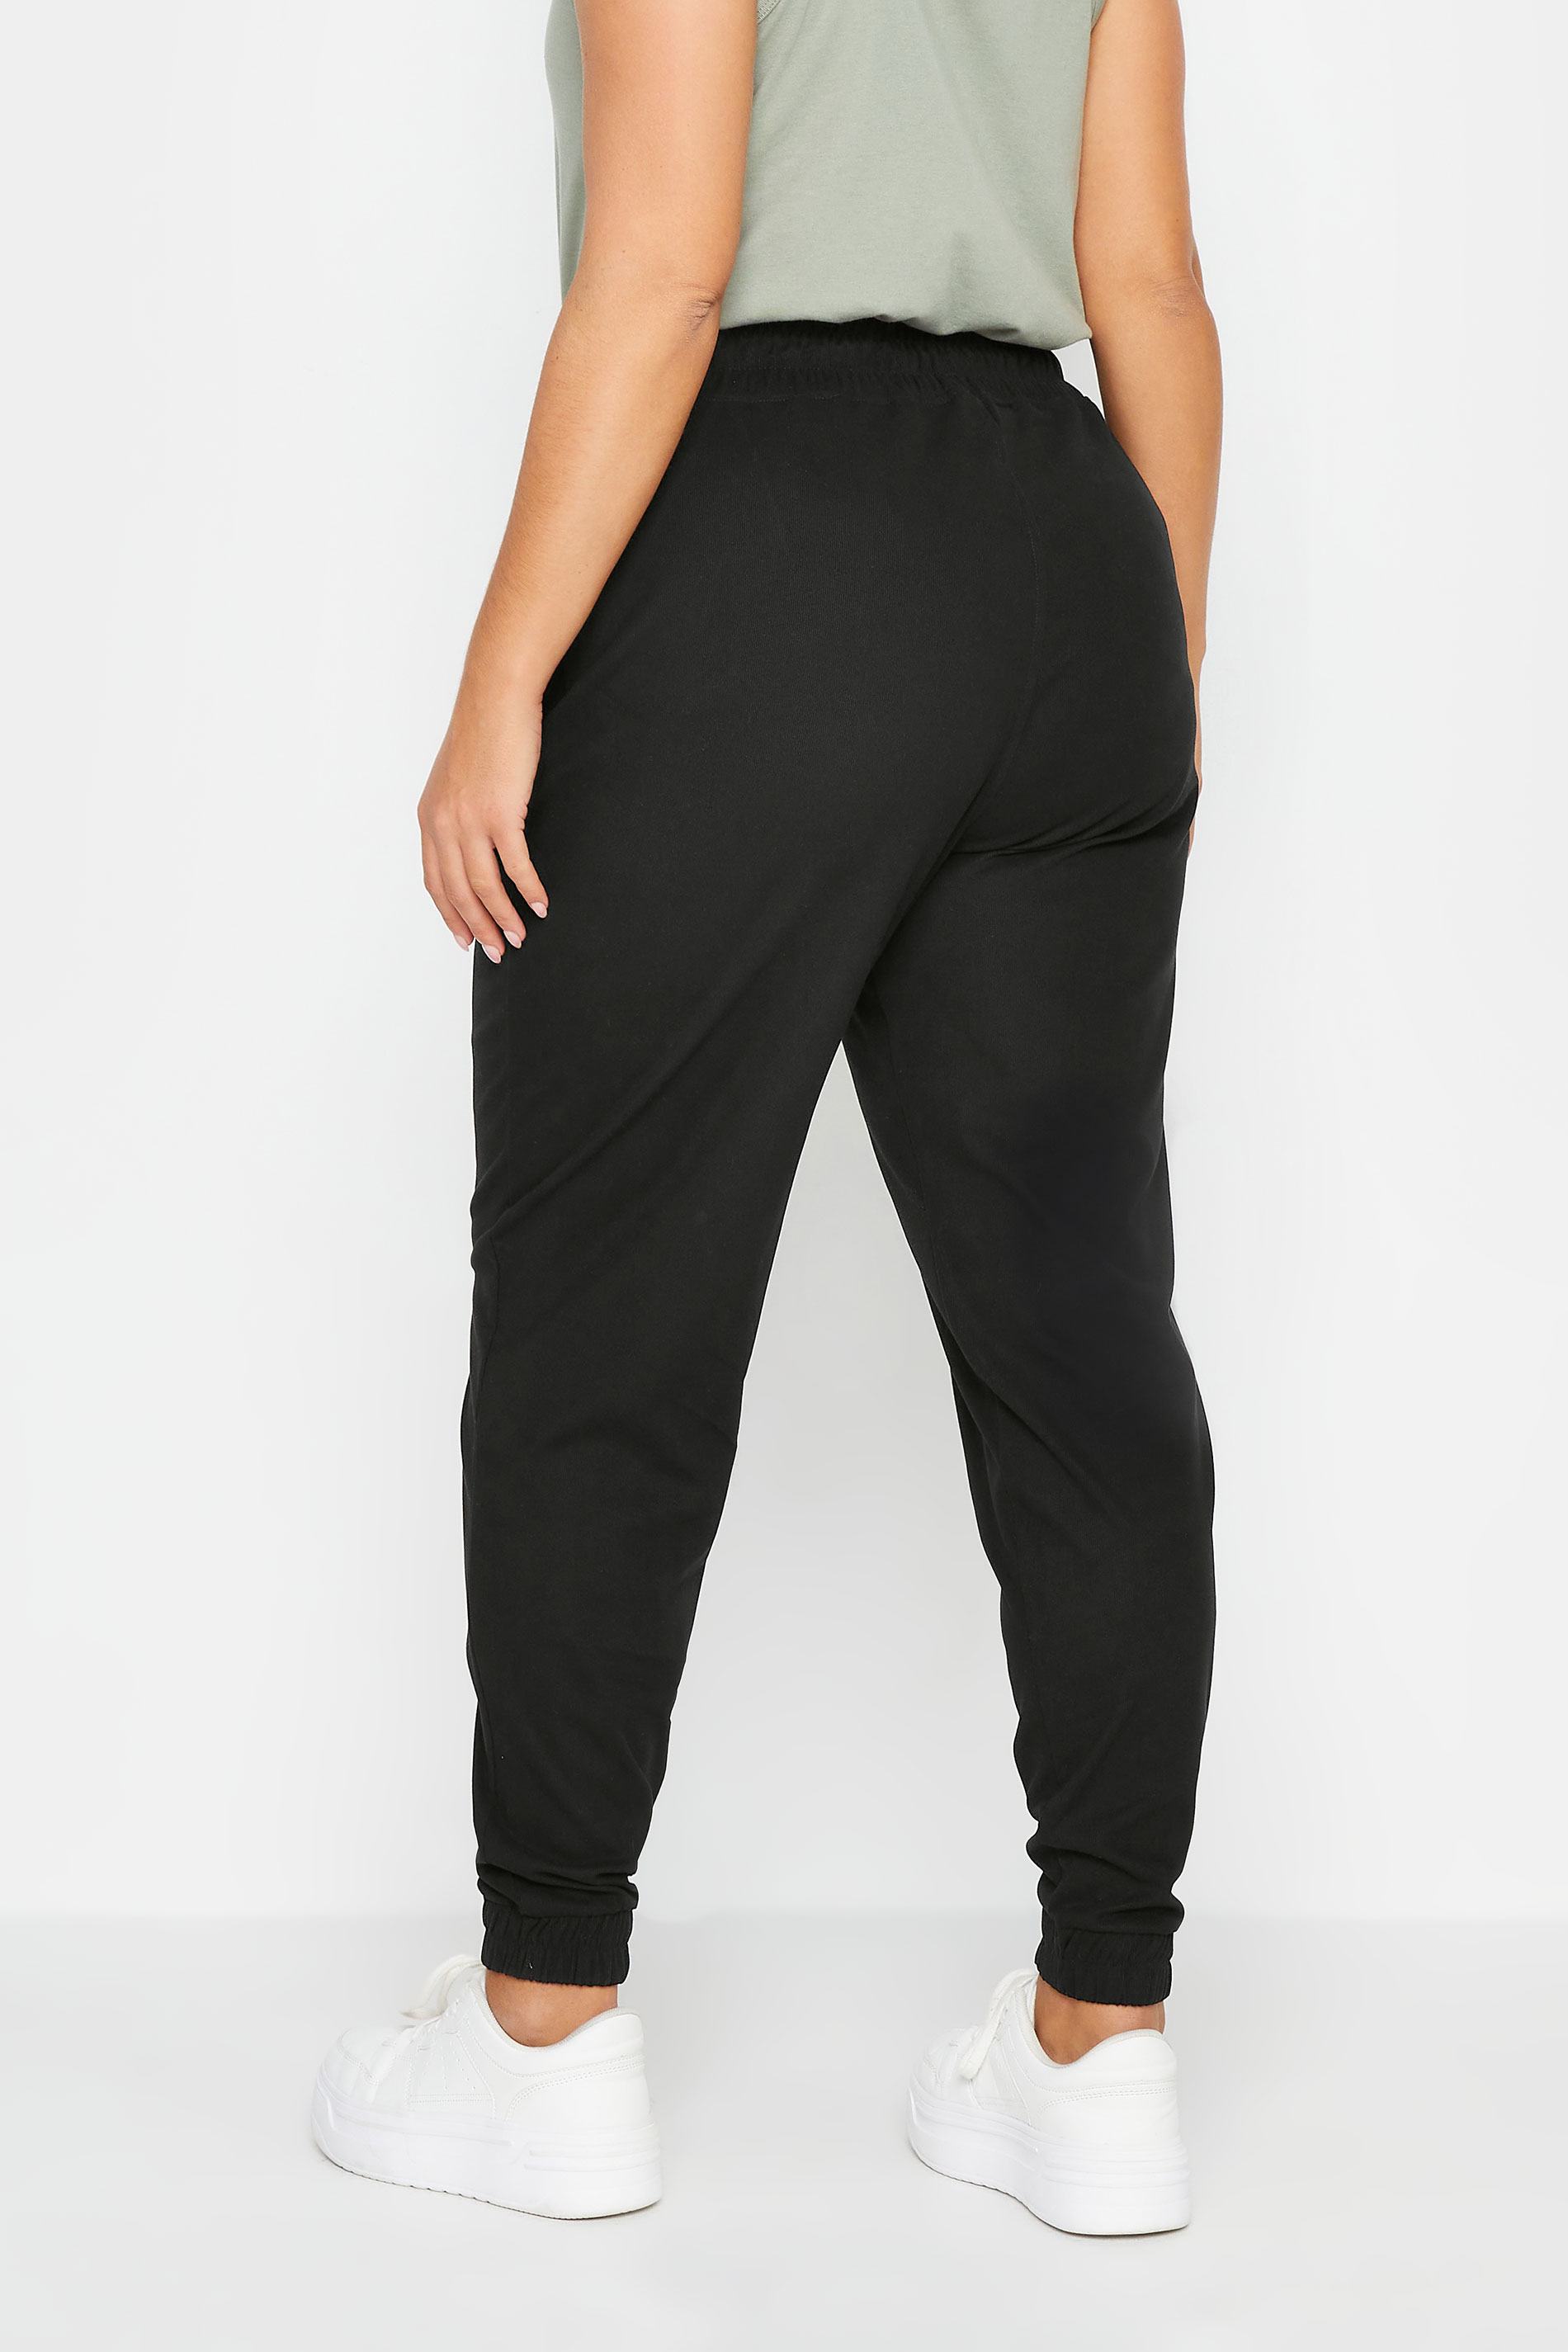 YOURS Plus Size Black Cuffed Elasticated Stretch Joggers | Yours Clothing 3